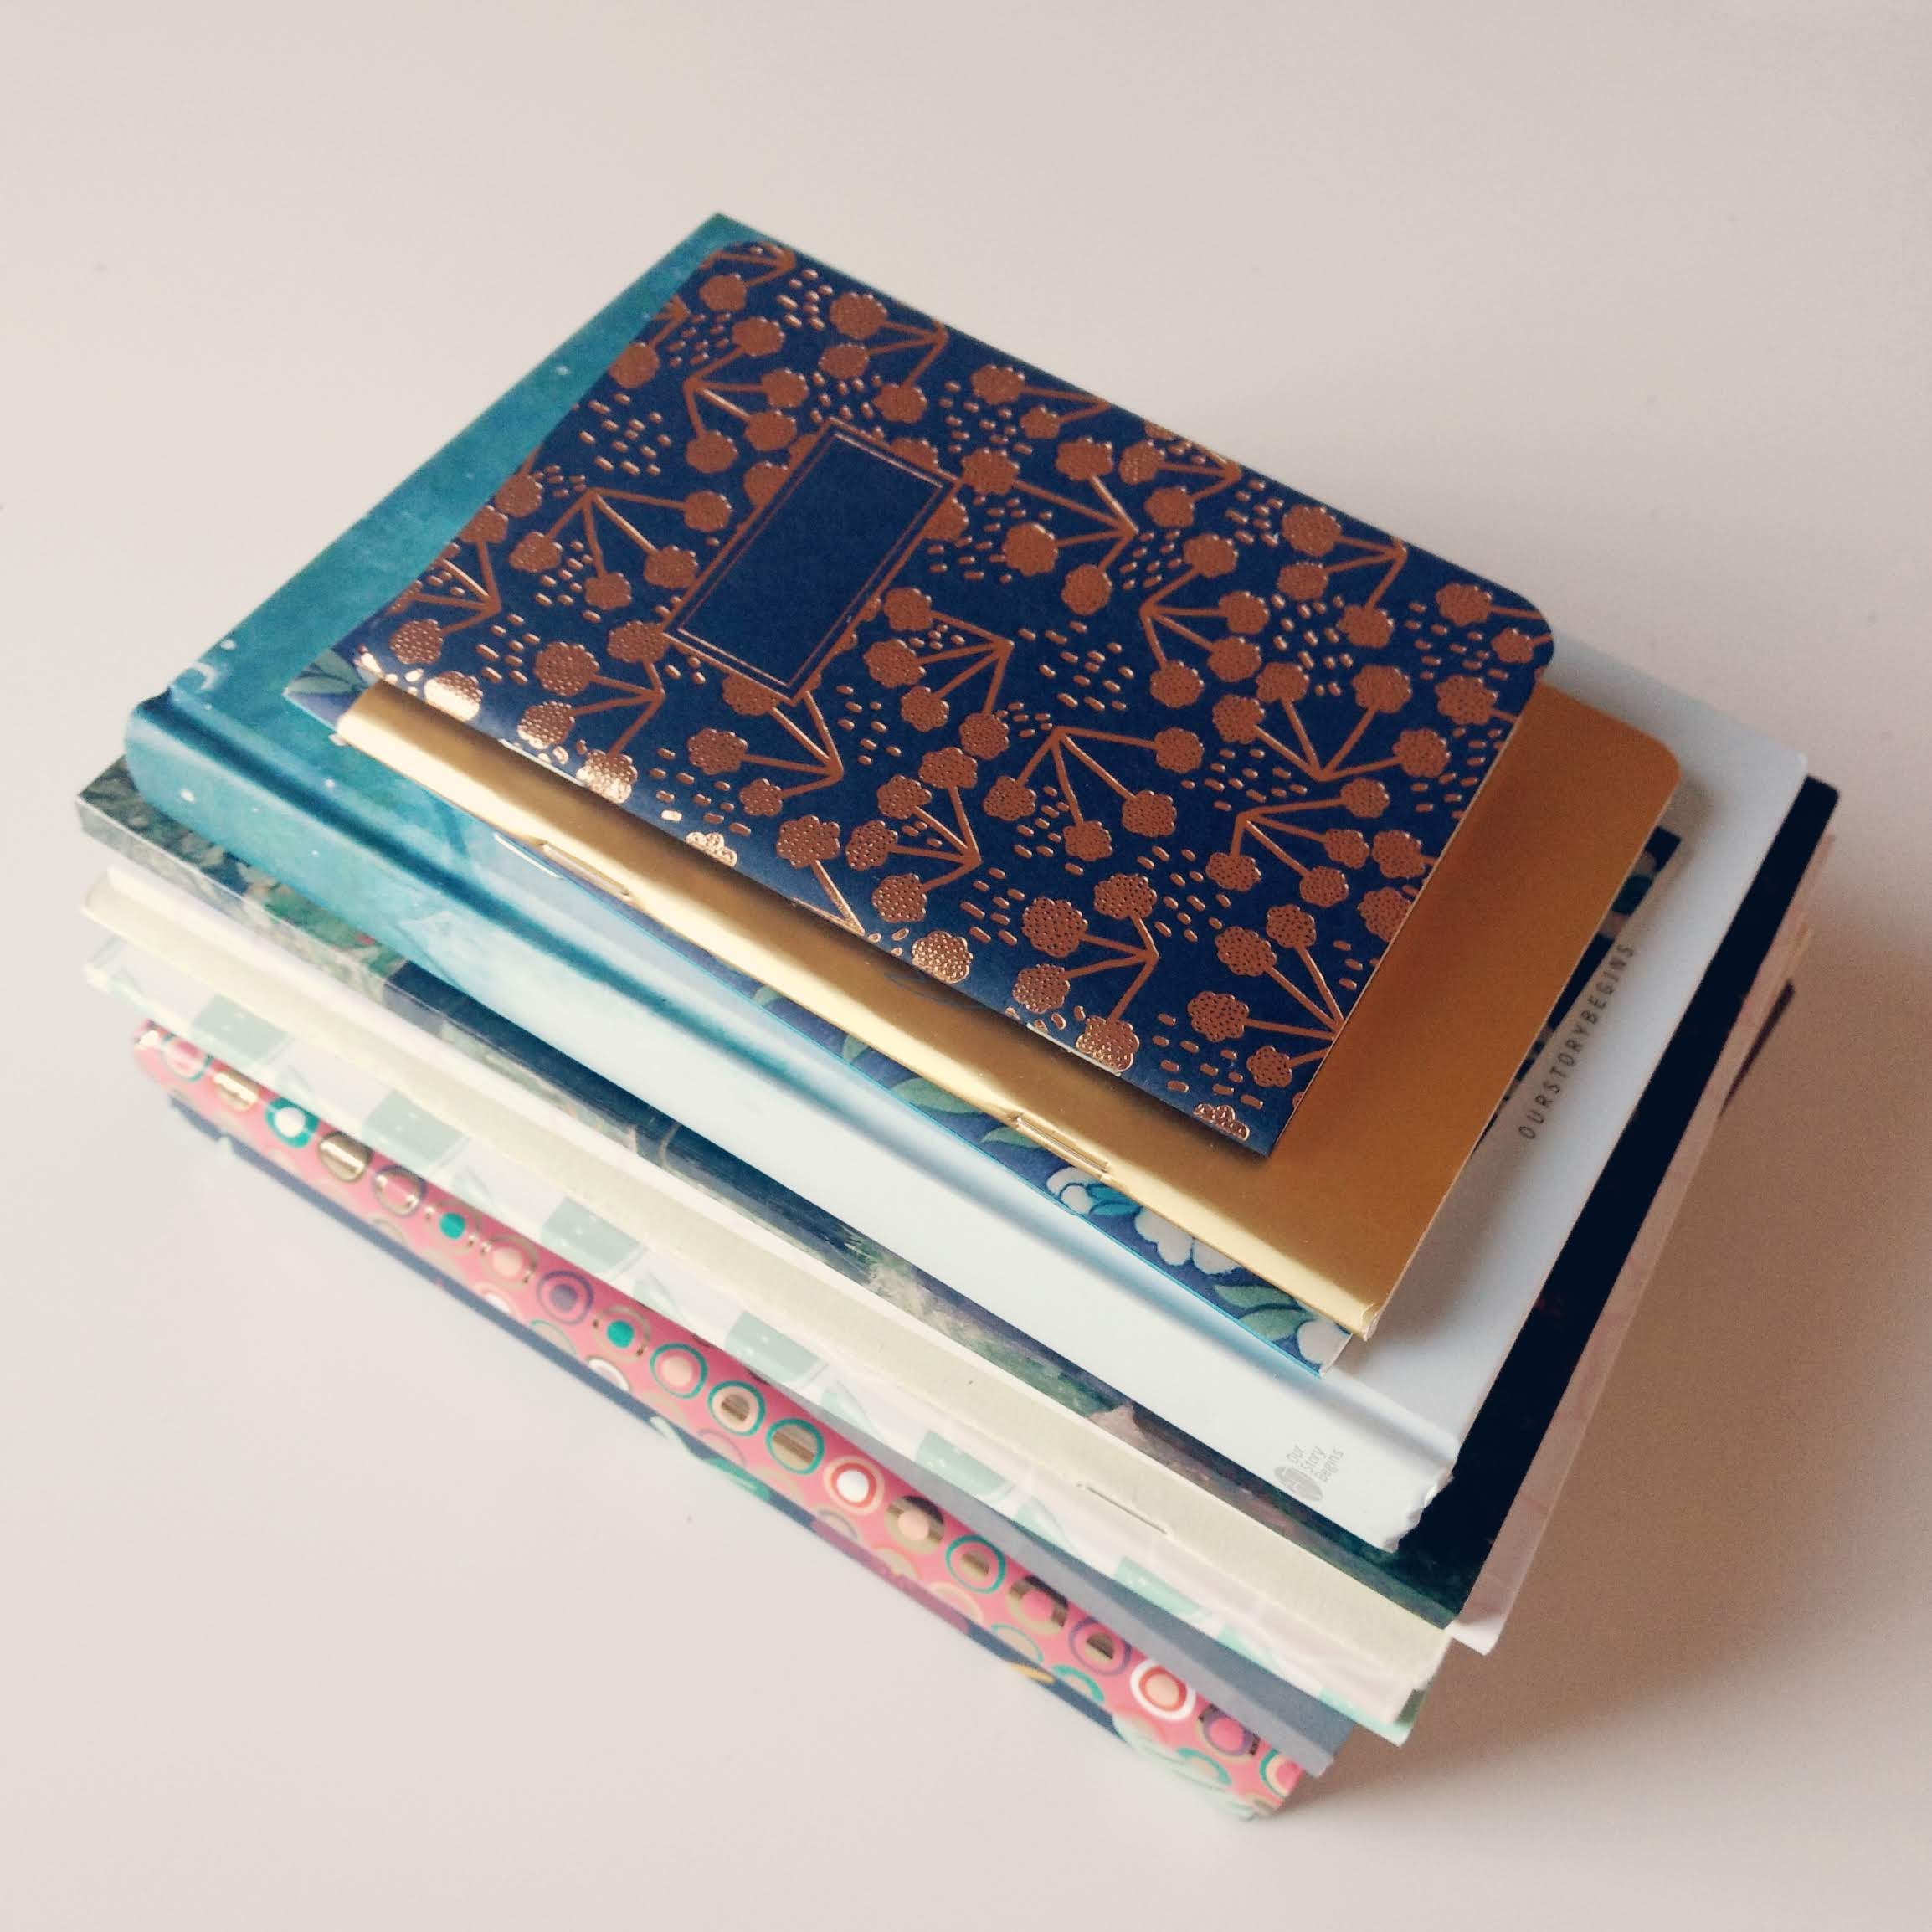 A stack of pretty notebooks.